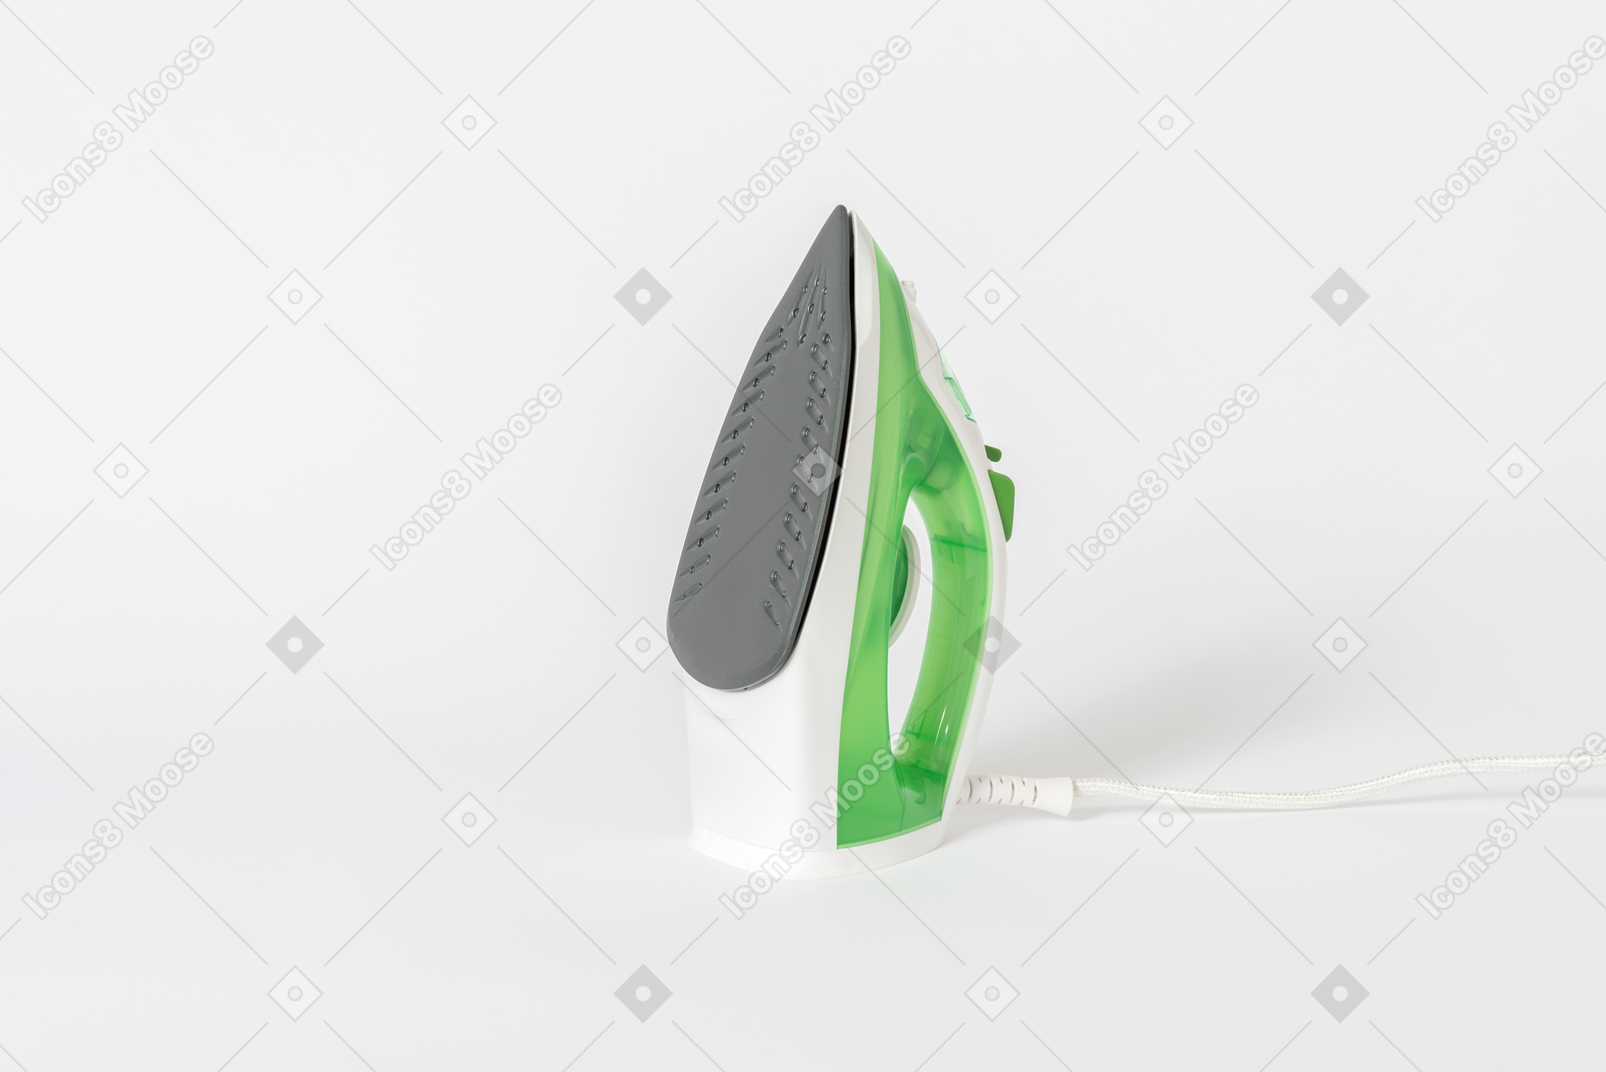 Green and white iron standing on white background